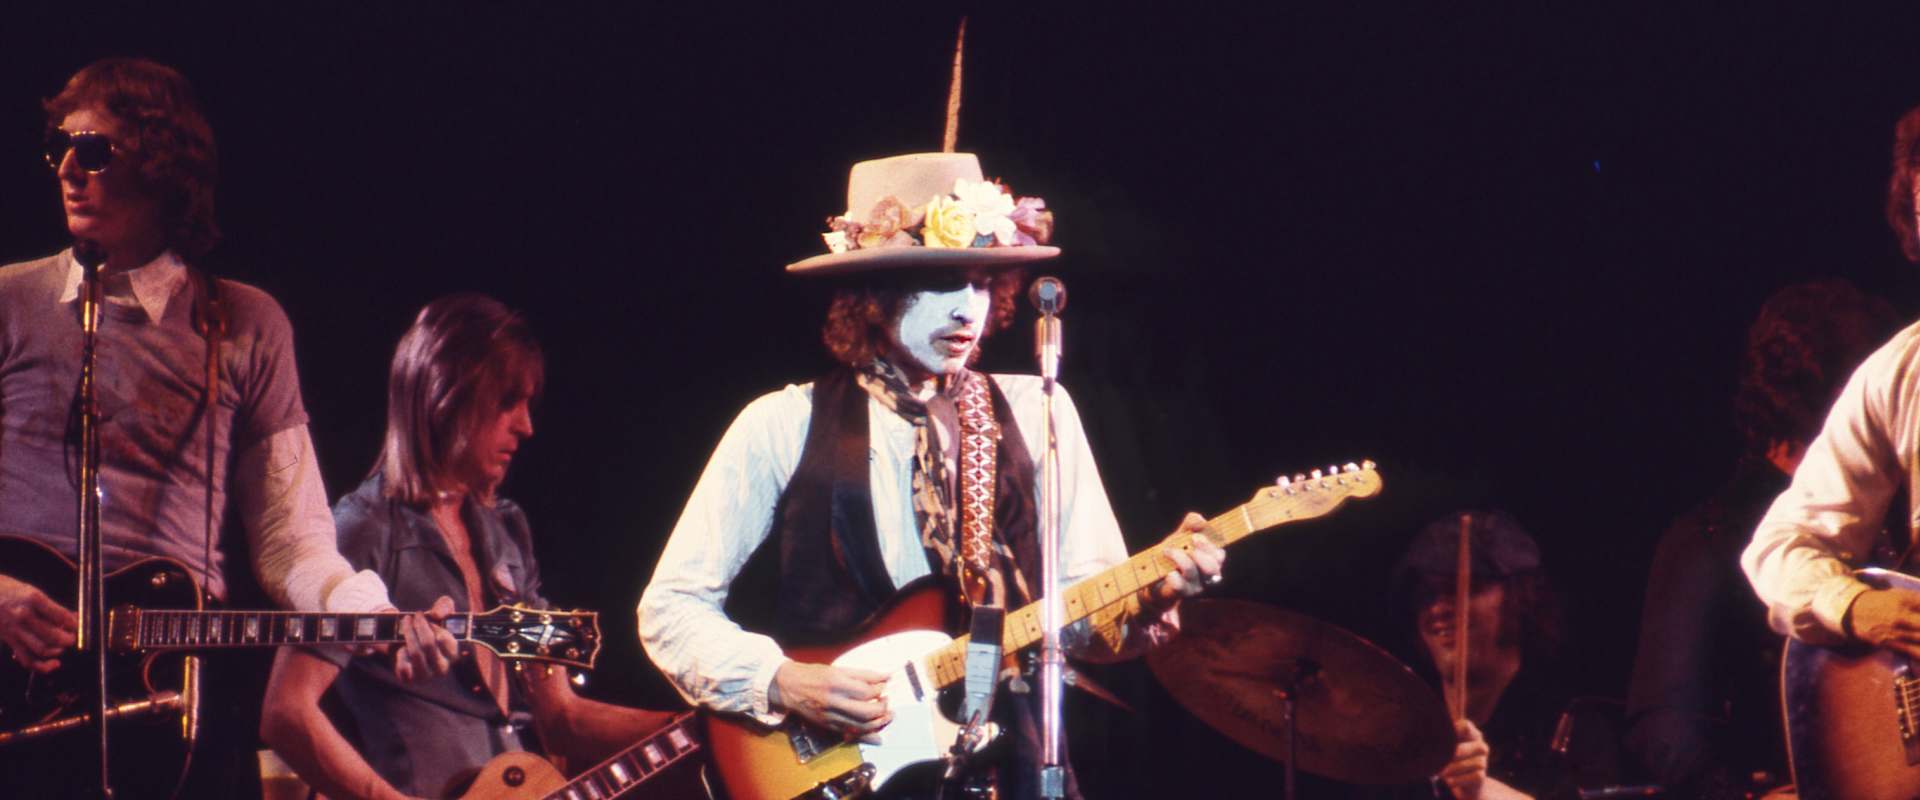 Rolling Thunder Revue: A Bob Dylan Story by Martin Scorsese background 1